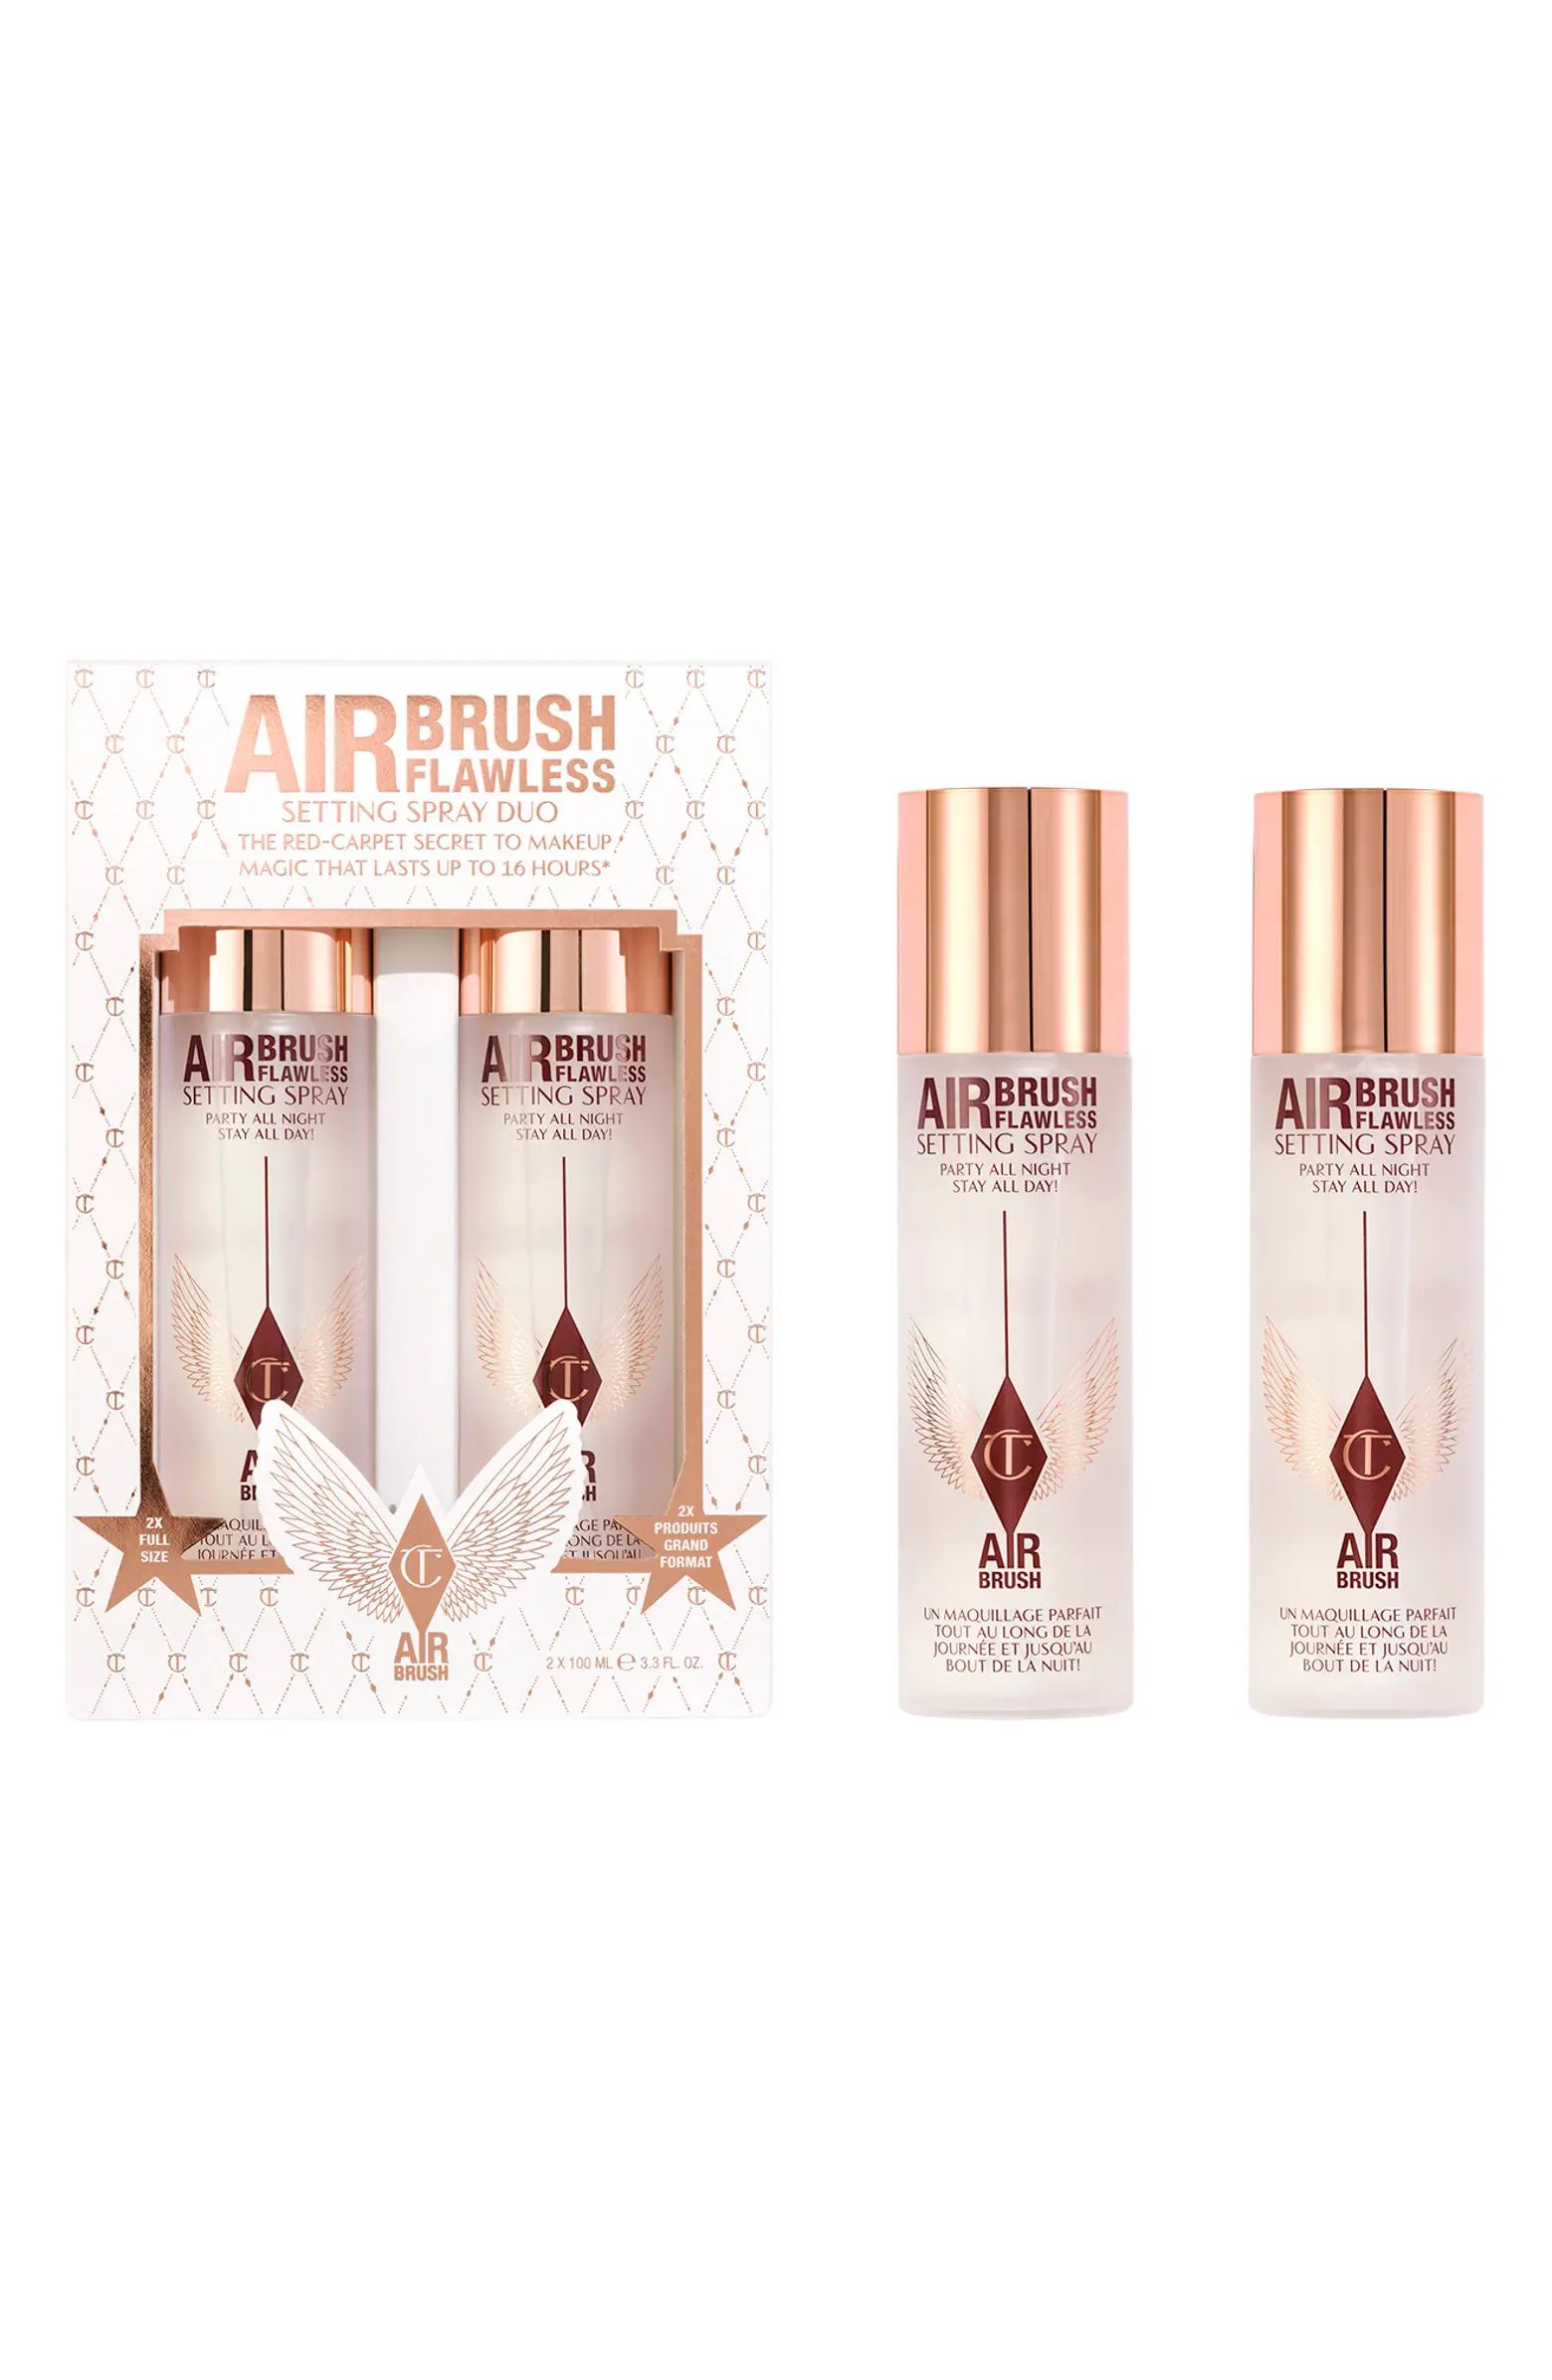 Airbrush Flawless Finish Setting Spray Duo $76 Value | Nordstrom